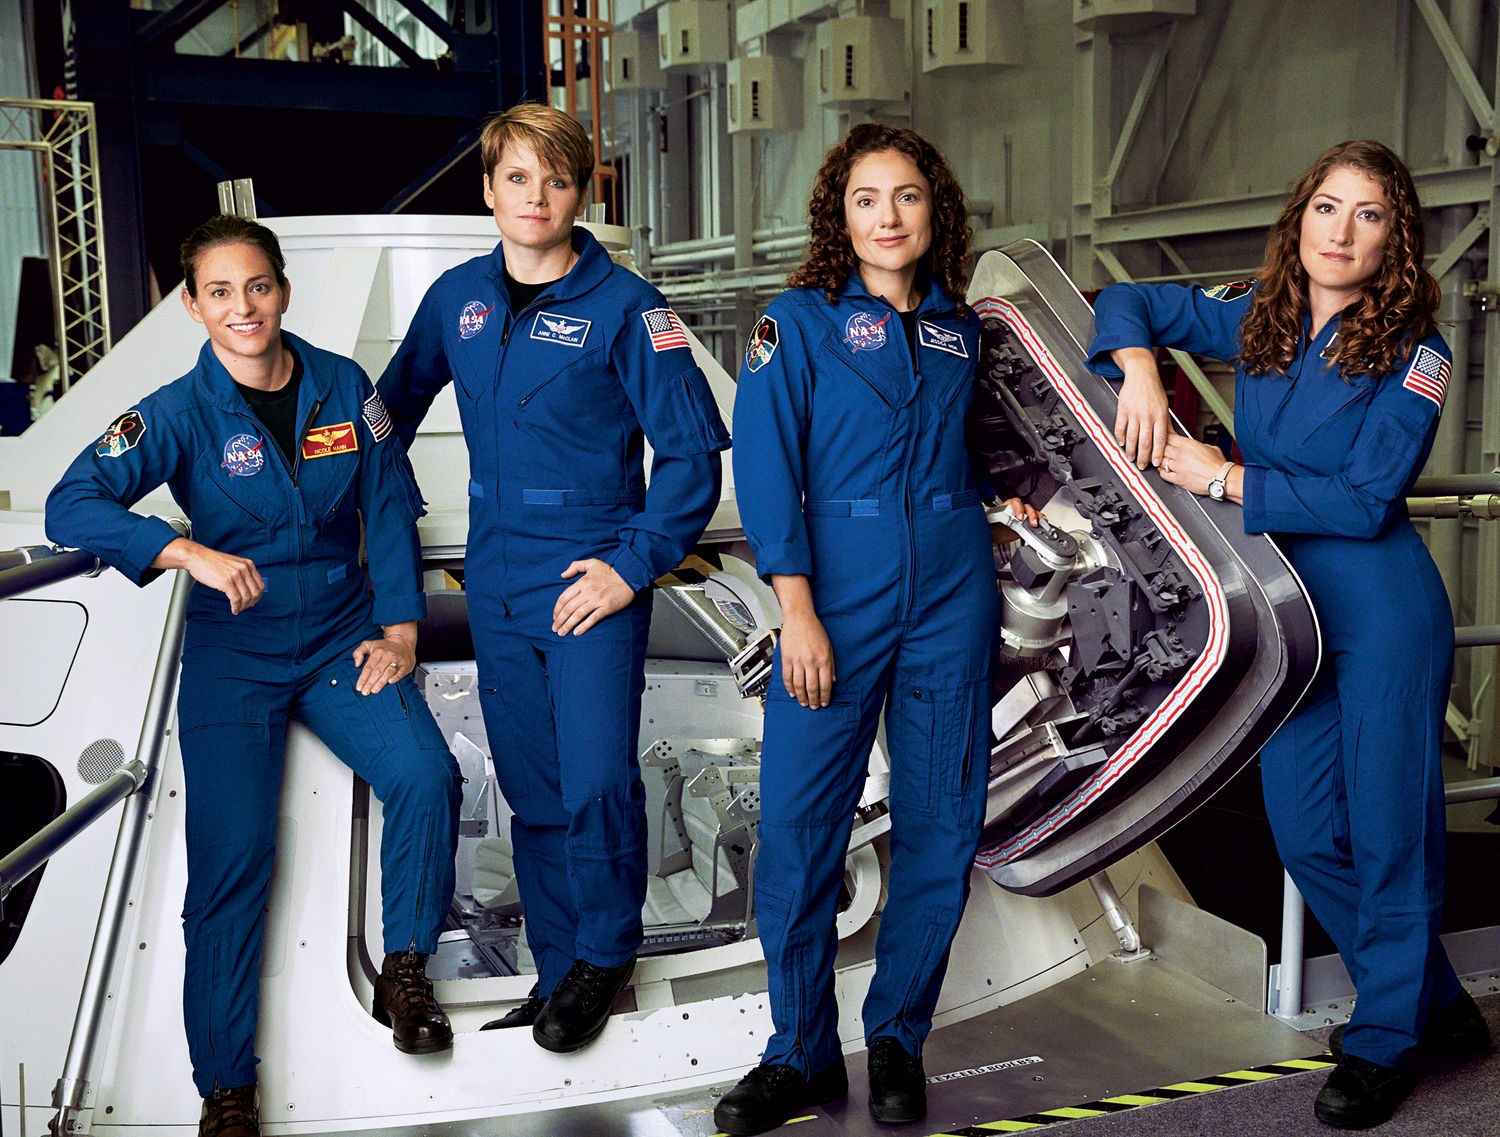 Five Female Astronauts that paved the way